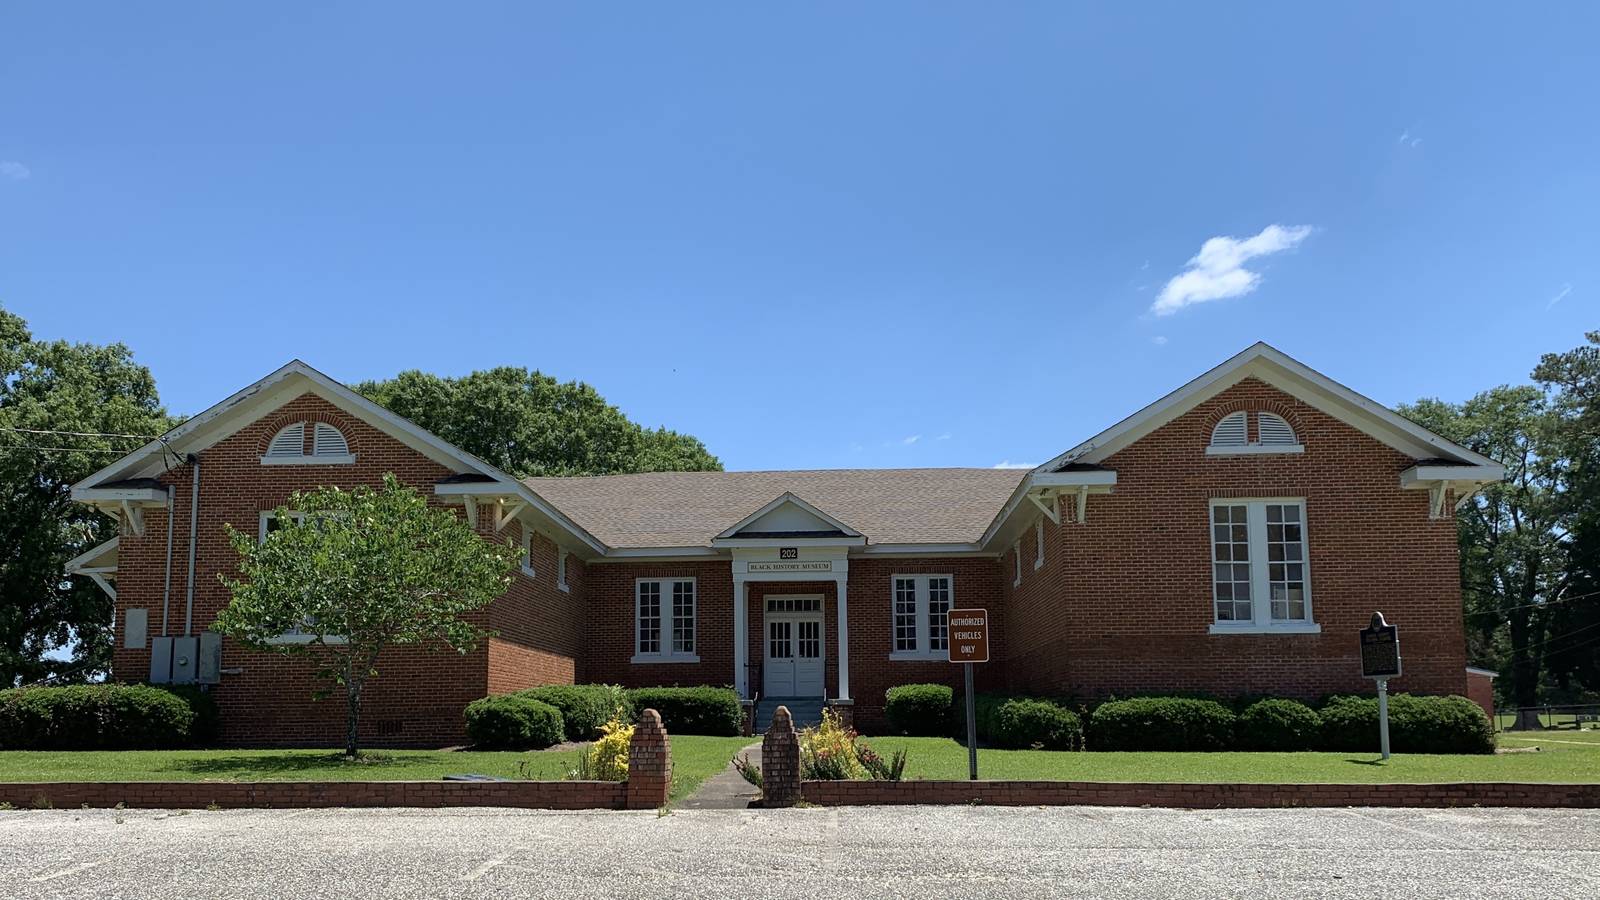 <p>The Elmore County Black History Museum (formerly the six-teacher Elmore County Training School) in Wetumpka, Alabama</p>